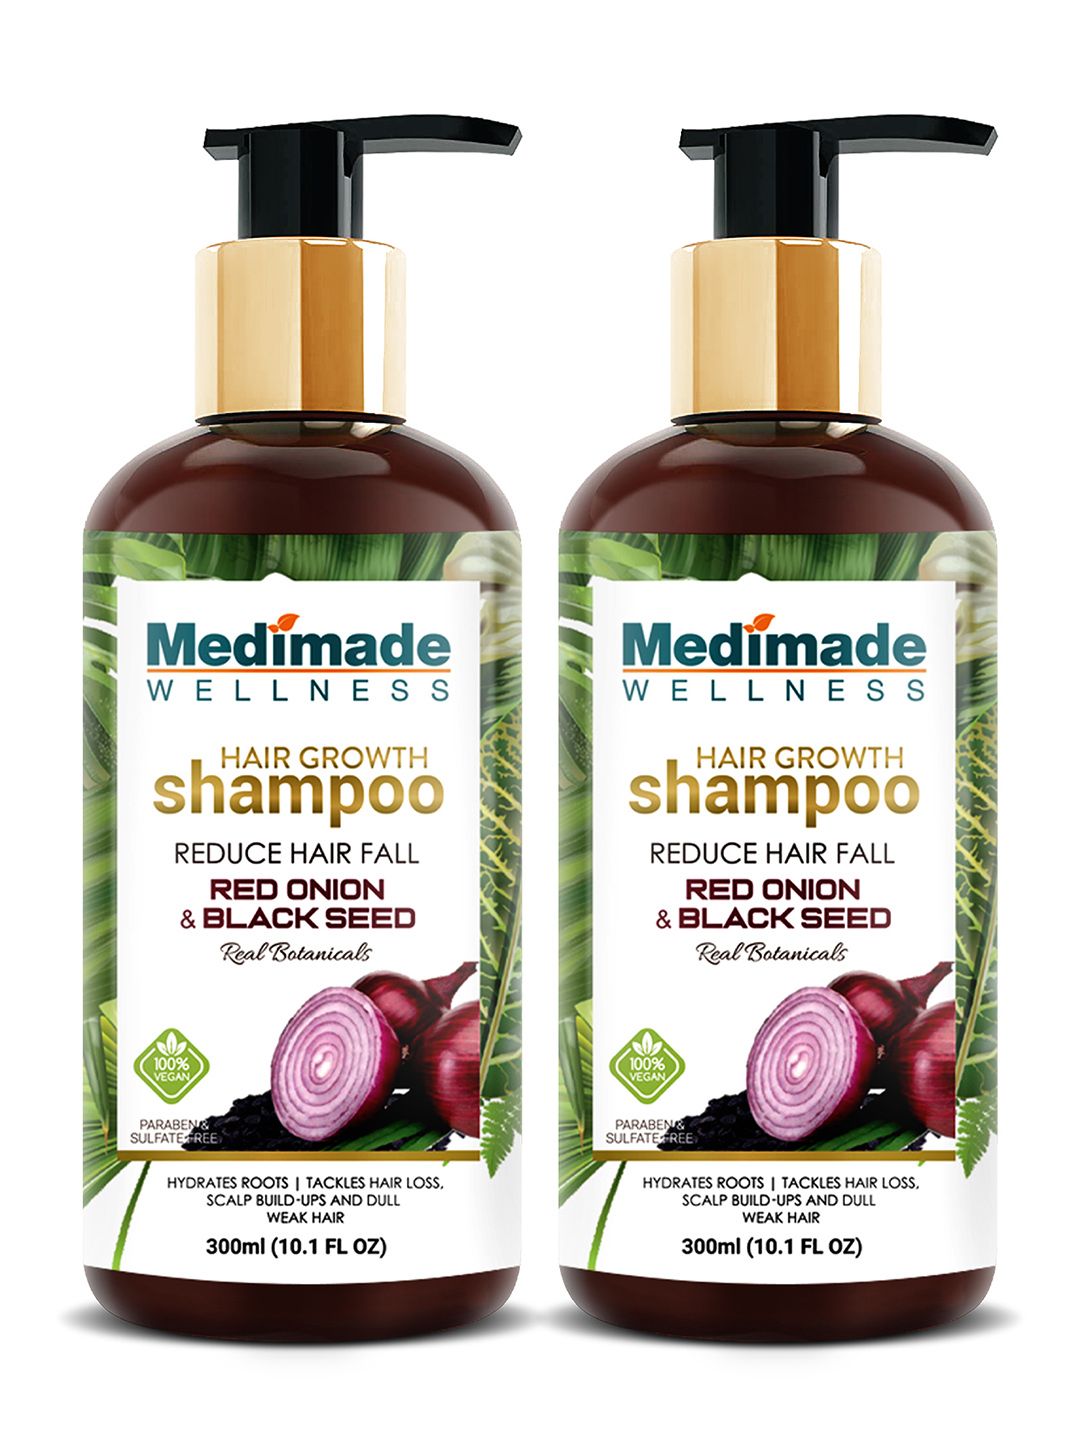 Medimade Pack of 2 Hair Growth Shampoo with Red Onion and Black Seed Oil - 300ml Each Price in India